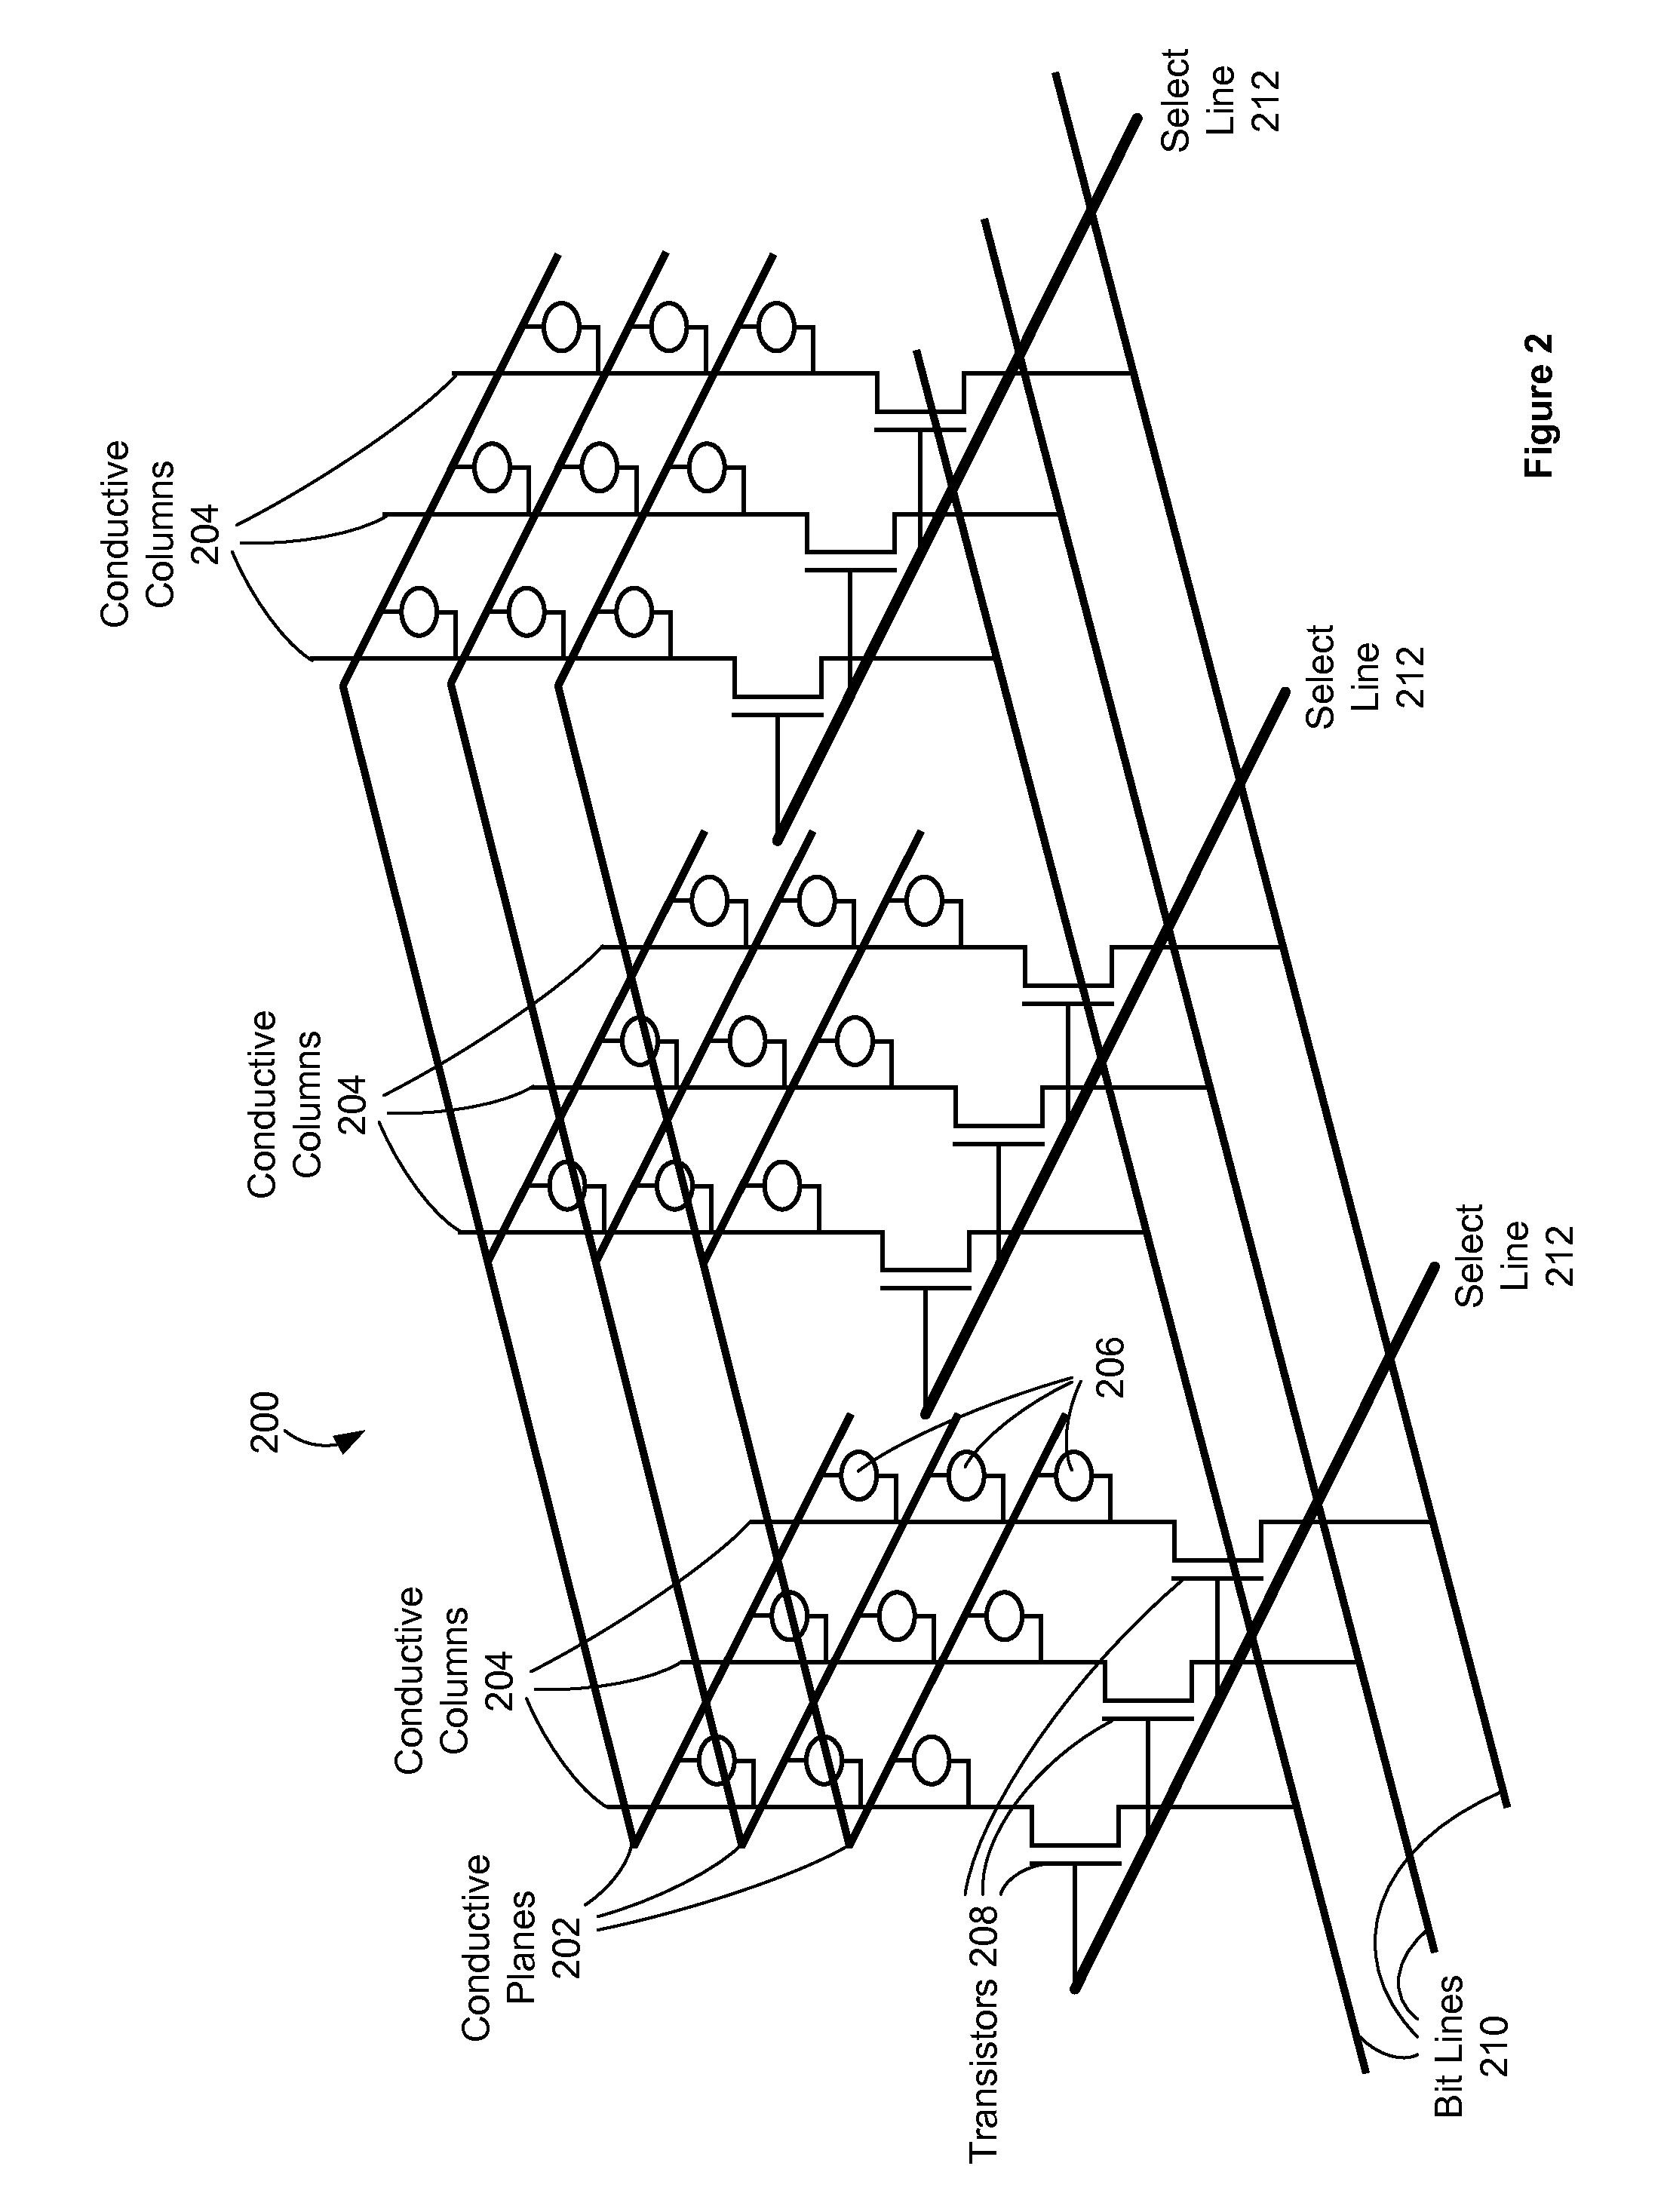 Three-dimensional memory array stacking structure